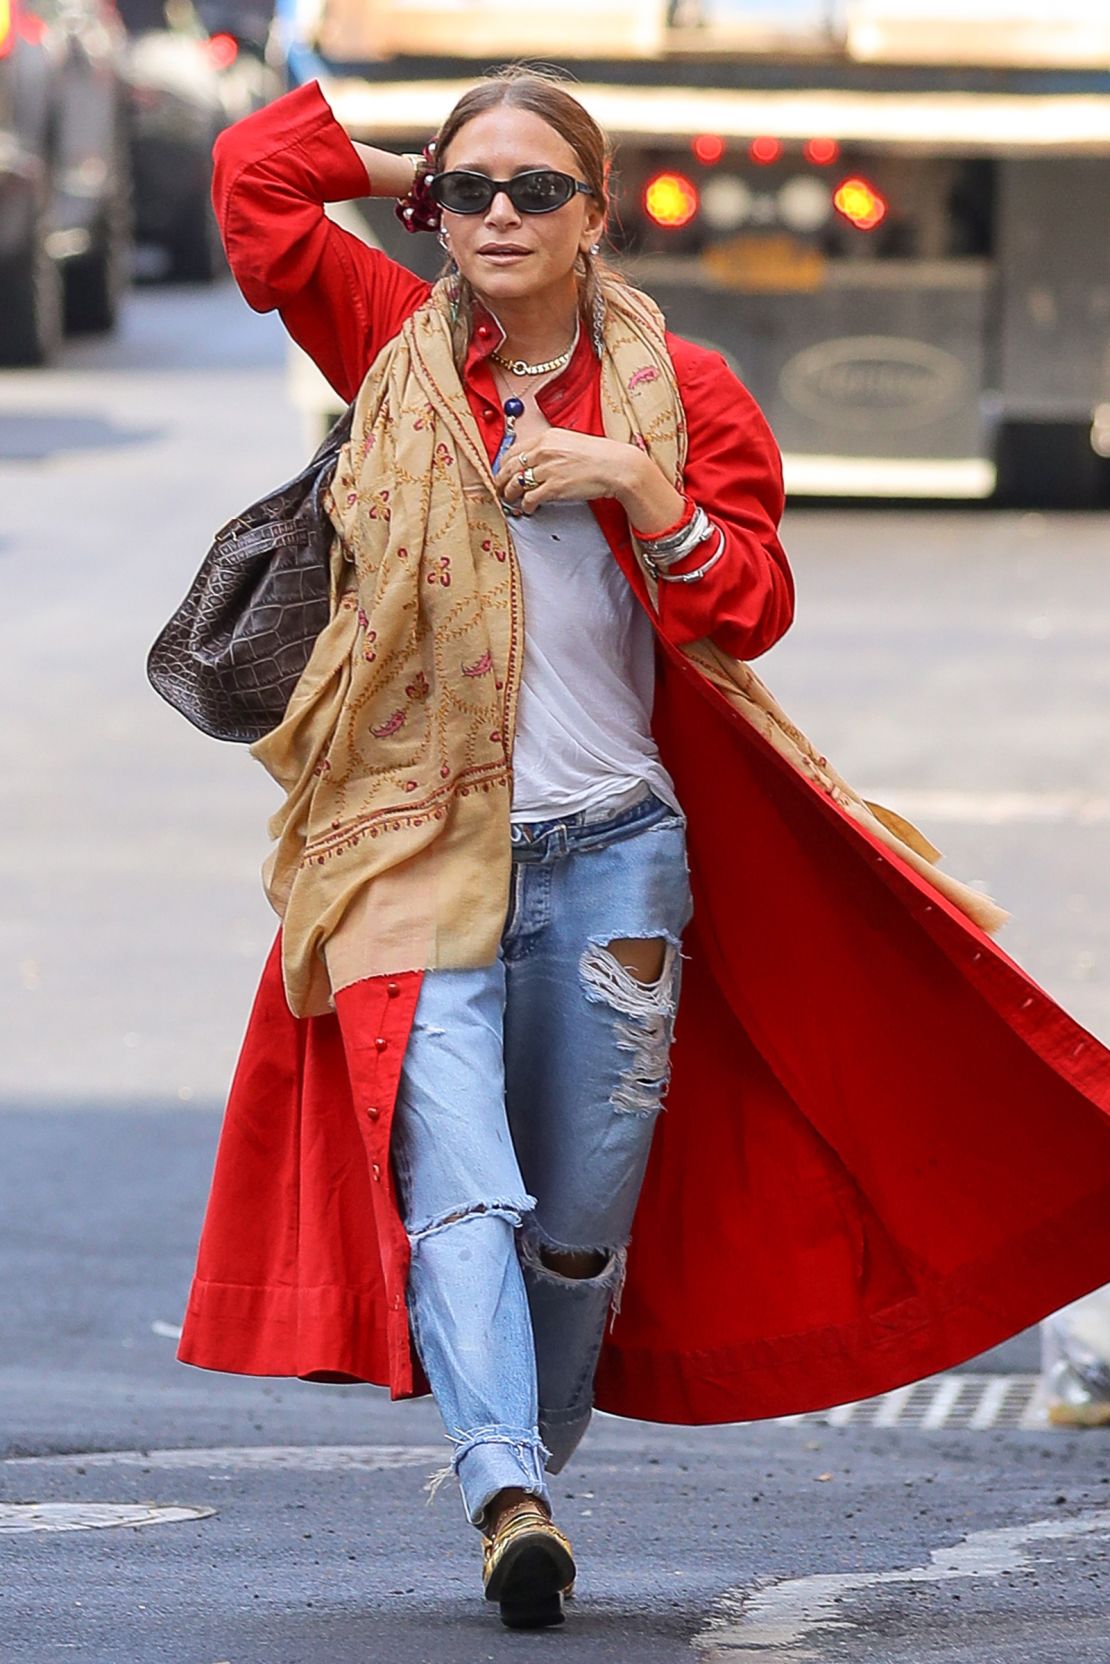 EXCLUSIVE: Mary-Kate Olsen and Pc Valmorbida spotted walking together after having lunch at Sant Ambroeus Madison in New York City, Mary-Kate wore ripped jeans with a red trench coat and gold flats

Pictured: Mary-Kate Olsen and Pc Valmorbida
Ref: SPL8067030 140623 EXCLUSIVE
Picture by: Felipe Ramales / SplashNews.com

Splash News and Pictures
USA: 310-525-5808
UK: 020 8126 1009
eamteam@shutterstock.com

World Rights